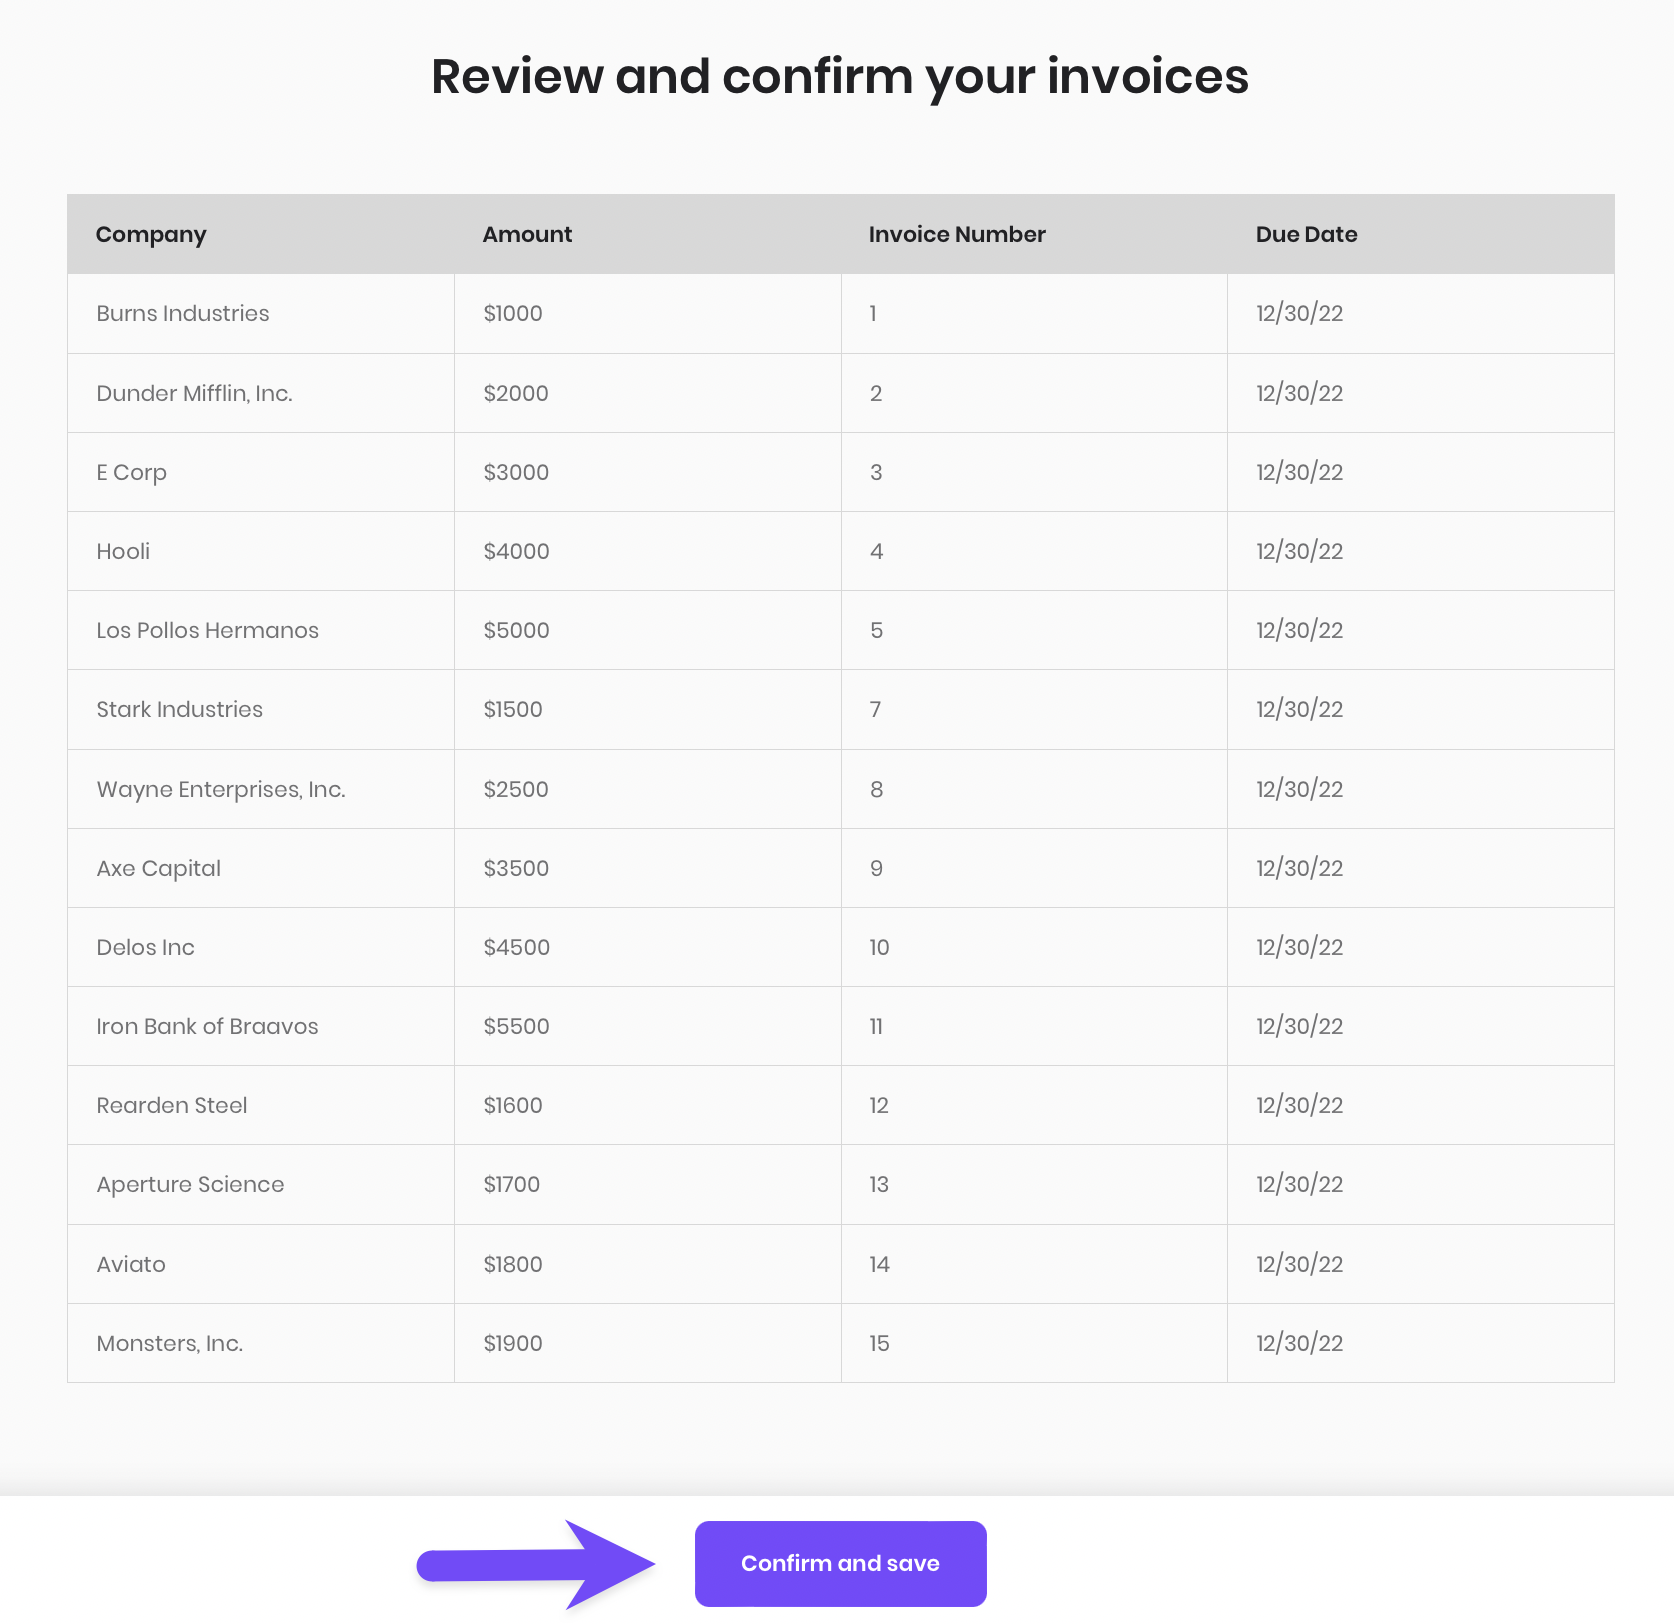 review_and_confirm_your_invoices.png